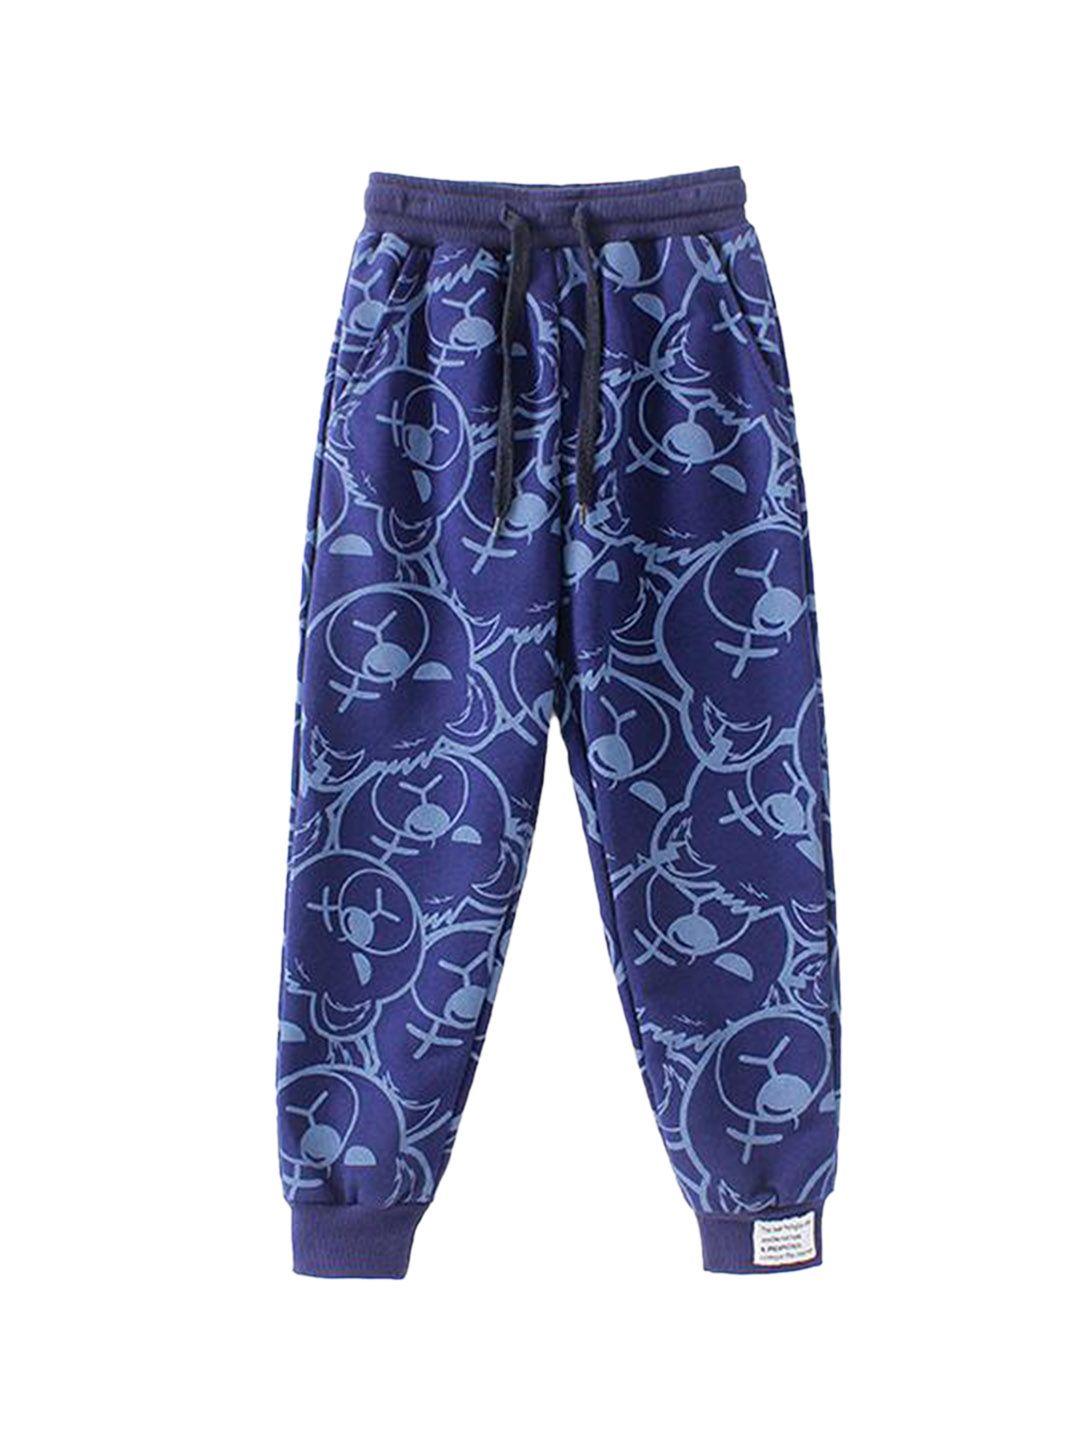 stylecast boys blue abstract printed easy wash cotton joggers